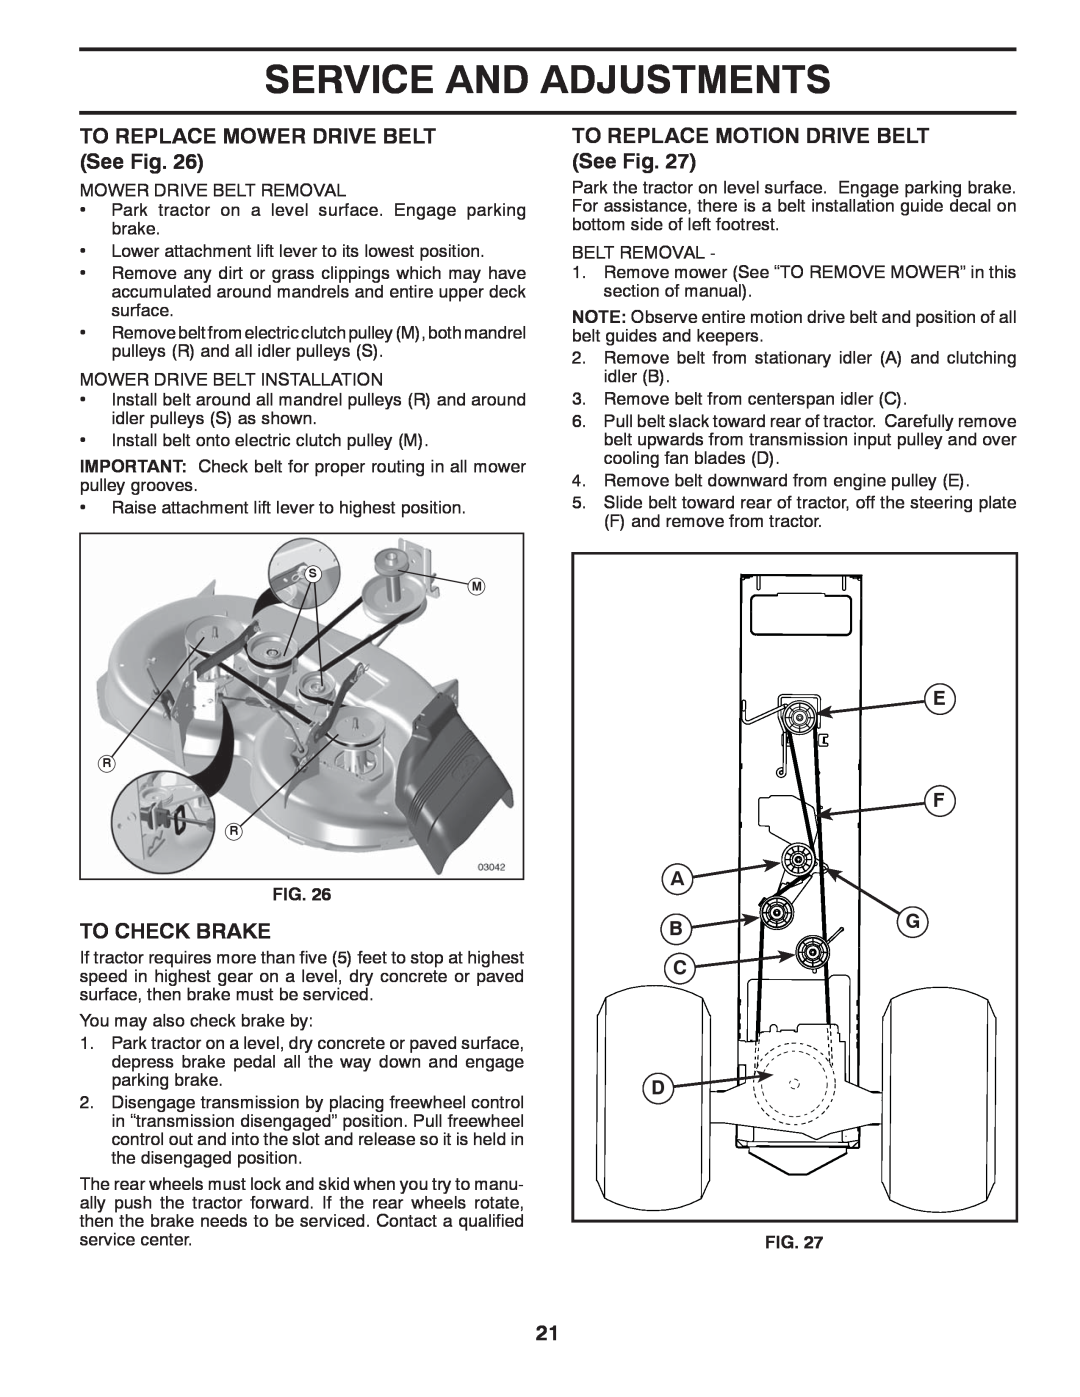 Poulan 419764 TO REPLACE MOWER DRIVE BELT See Fig, To Check Brake, TO REPLACE MOTION DRIVE BELT See Fig, E F A B G C D 